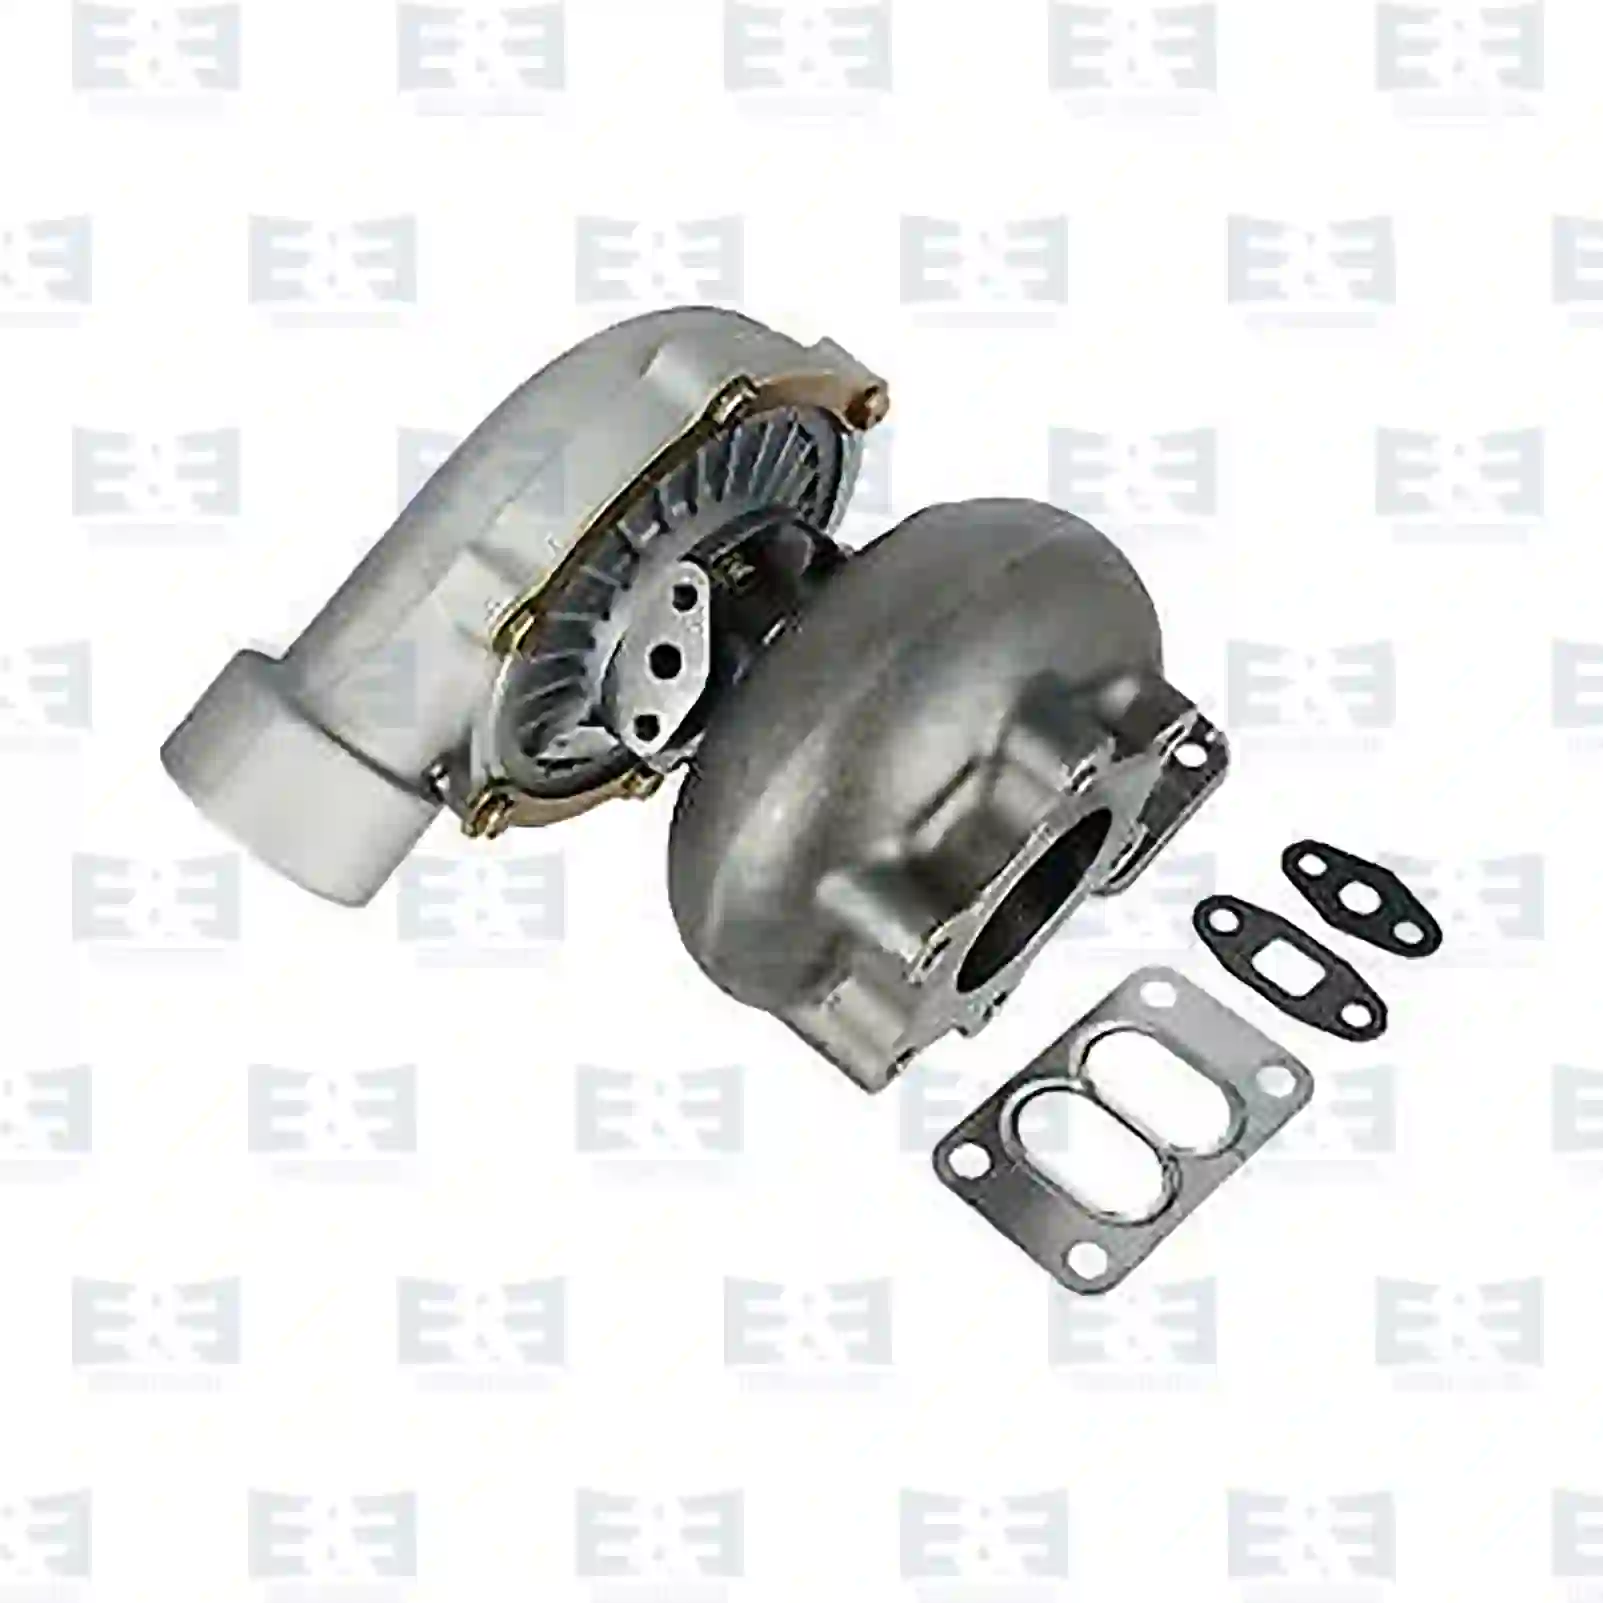 Turbocharger Turbocharger, with gasket kit, EE No 2E2200754 ,  oem no:N1011002912, N1011003536, 0030960099, 0030960199, 0030960899, 0030960999, 0030962399, 0030962499, 0030966899, 0030966999, 0030967699, 0030967899, 0030967999, 0030968999, 0030969099, 0040960799, 0040960899, 0040960999, 004096099980, 0040961099, 0040961899, 0040961999, 0040962099, 0040962199, 0040962899, 0040962999, 0040964099, 0040964199, 0040964299, 0040964399, 0040965299, 0040965599, 0040965699, 0040965799, 0040966099, 004096609980, 0040966199, 0040966299, 0040966399, 0040967699, 0050962399, 0050962499, 0050962599, 005096259980, 0050962699, 0050969399, 005096939980, 0060963199, 0060963299, 0060963399, 0060963499, 4620960299, 4620960399, 5096939980 E&E Truck Spare Parts | Truck Spare Parts, Auotomotive Spare Parts